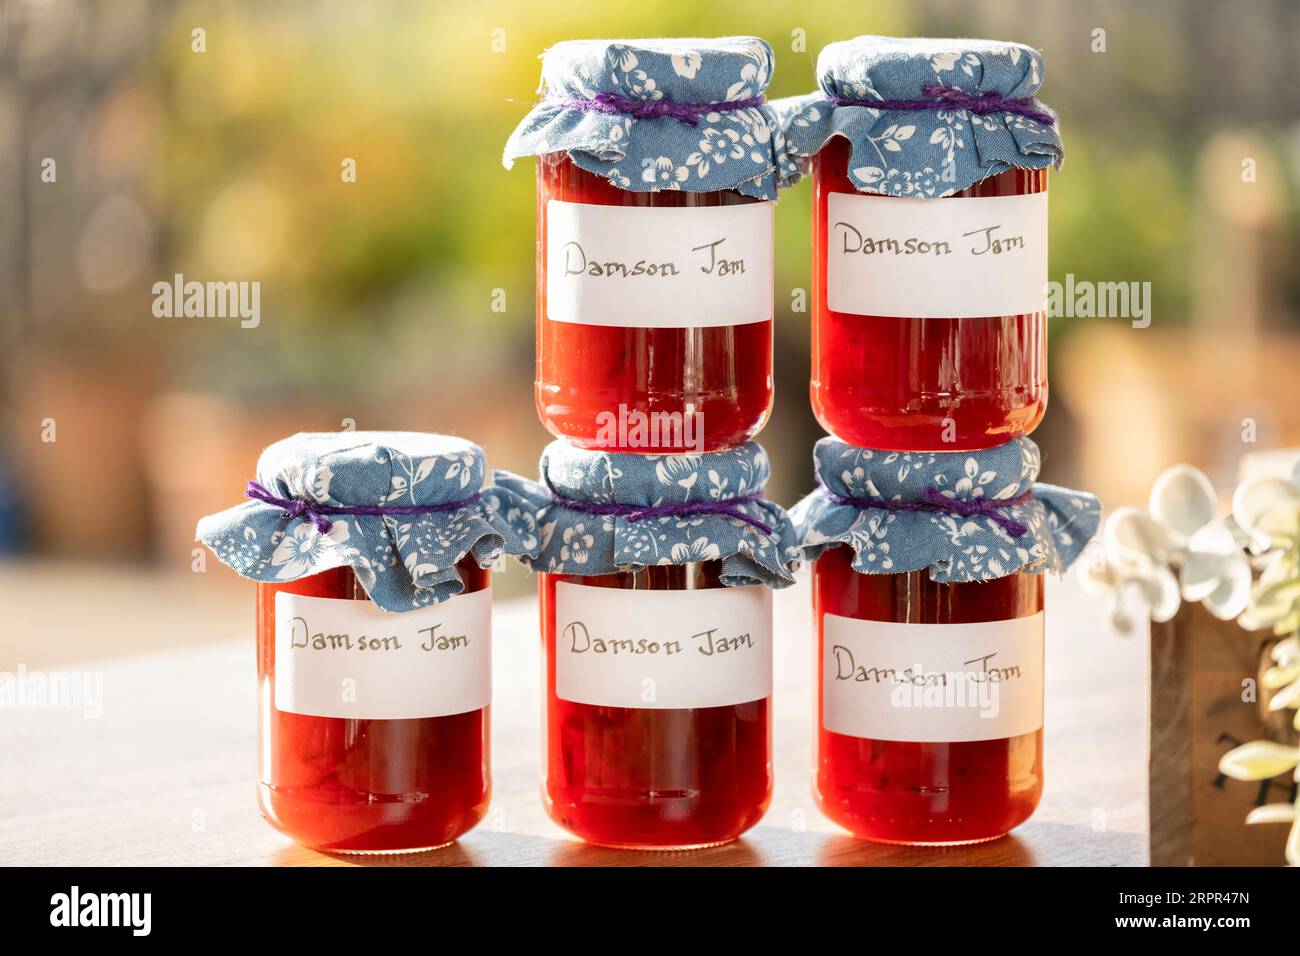 Jars of homemade  Damson jam. The glass jars have clear handwritten labels and the jars have a cloth topping. Stock Photo